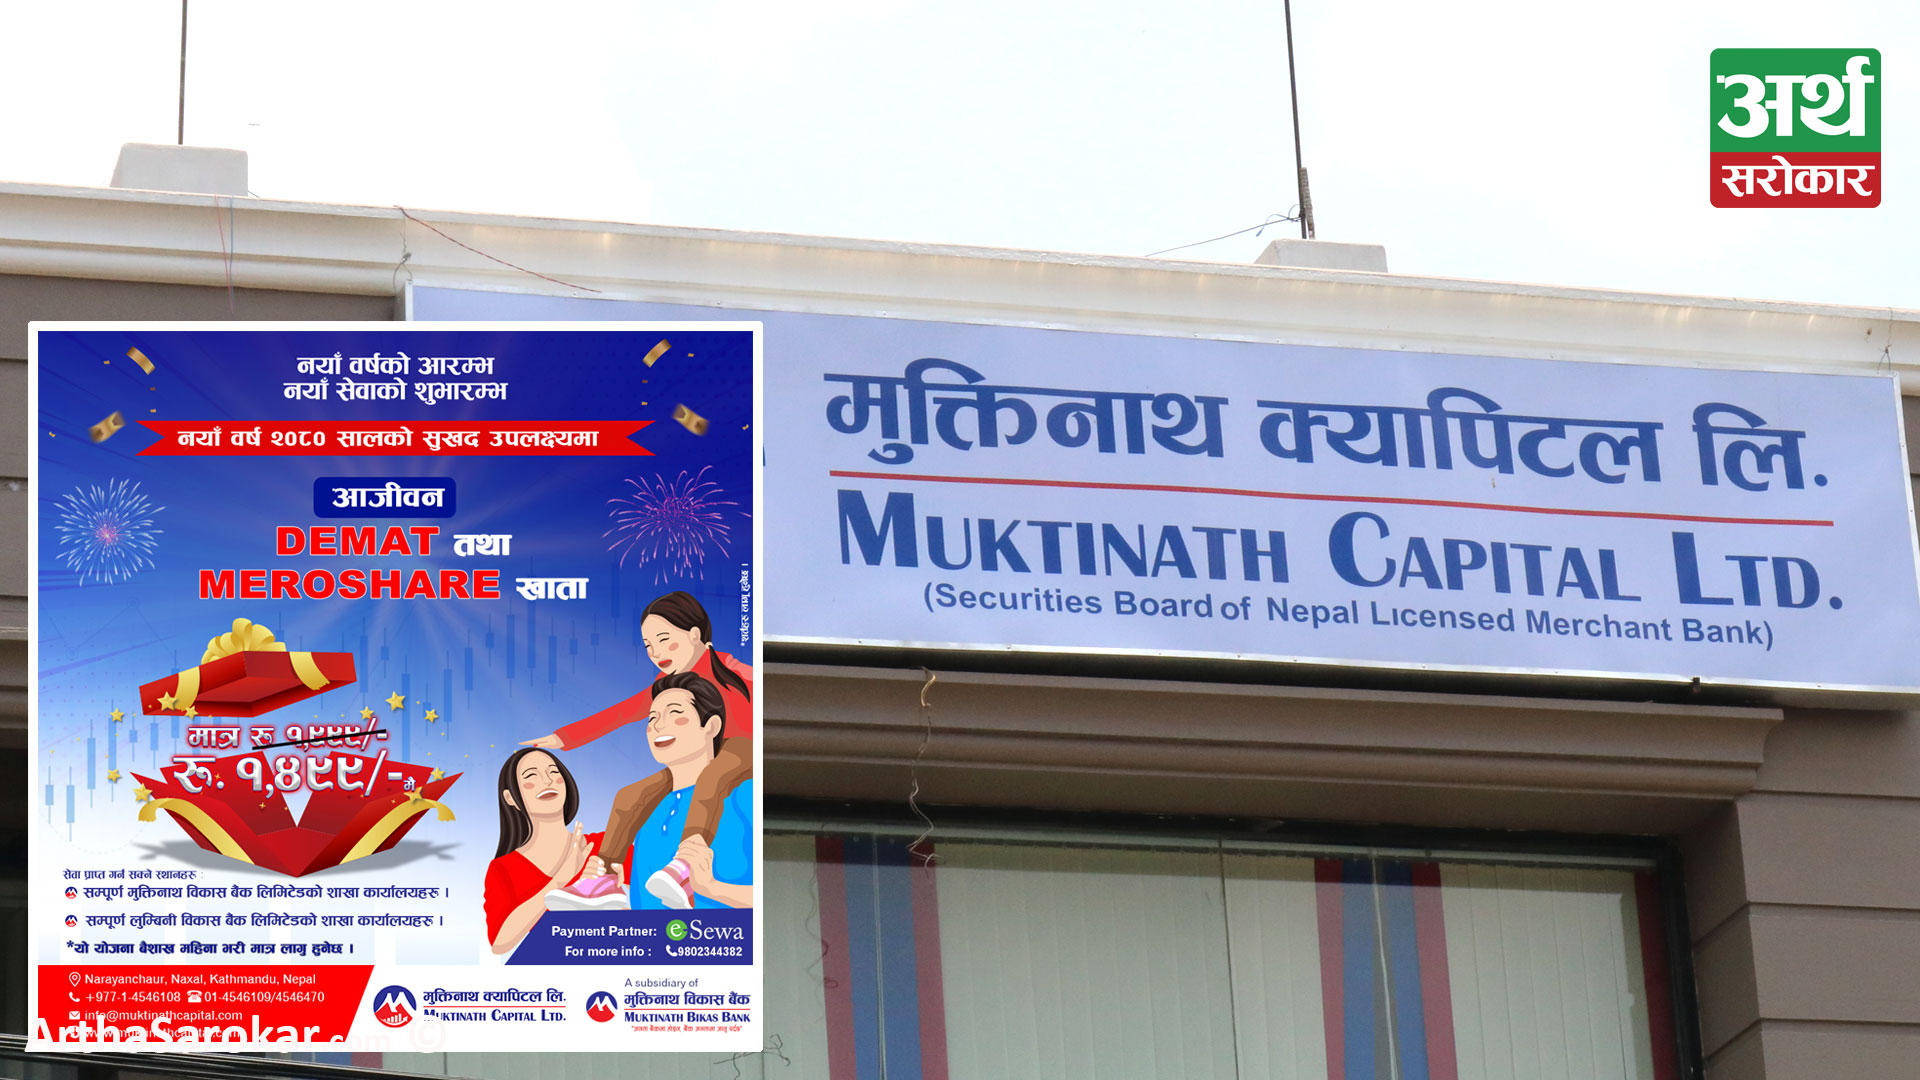 New Year Offer from Muktinath Capital: 2080 Offer on PMS and 25 % Discount on Lifetime Demat and Meroshare account